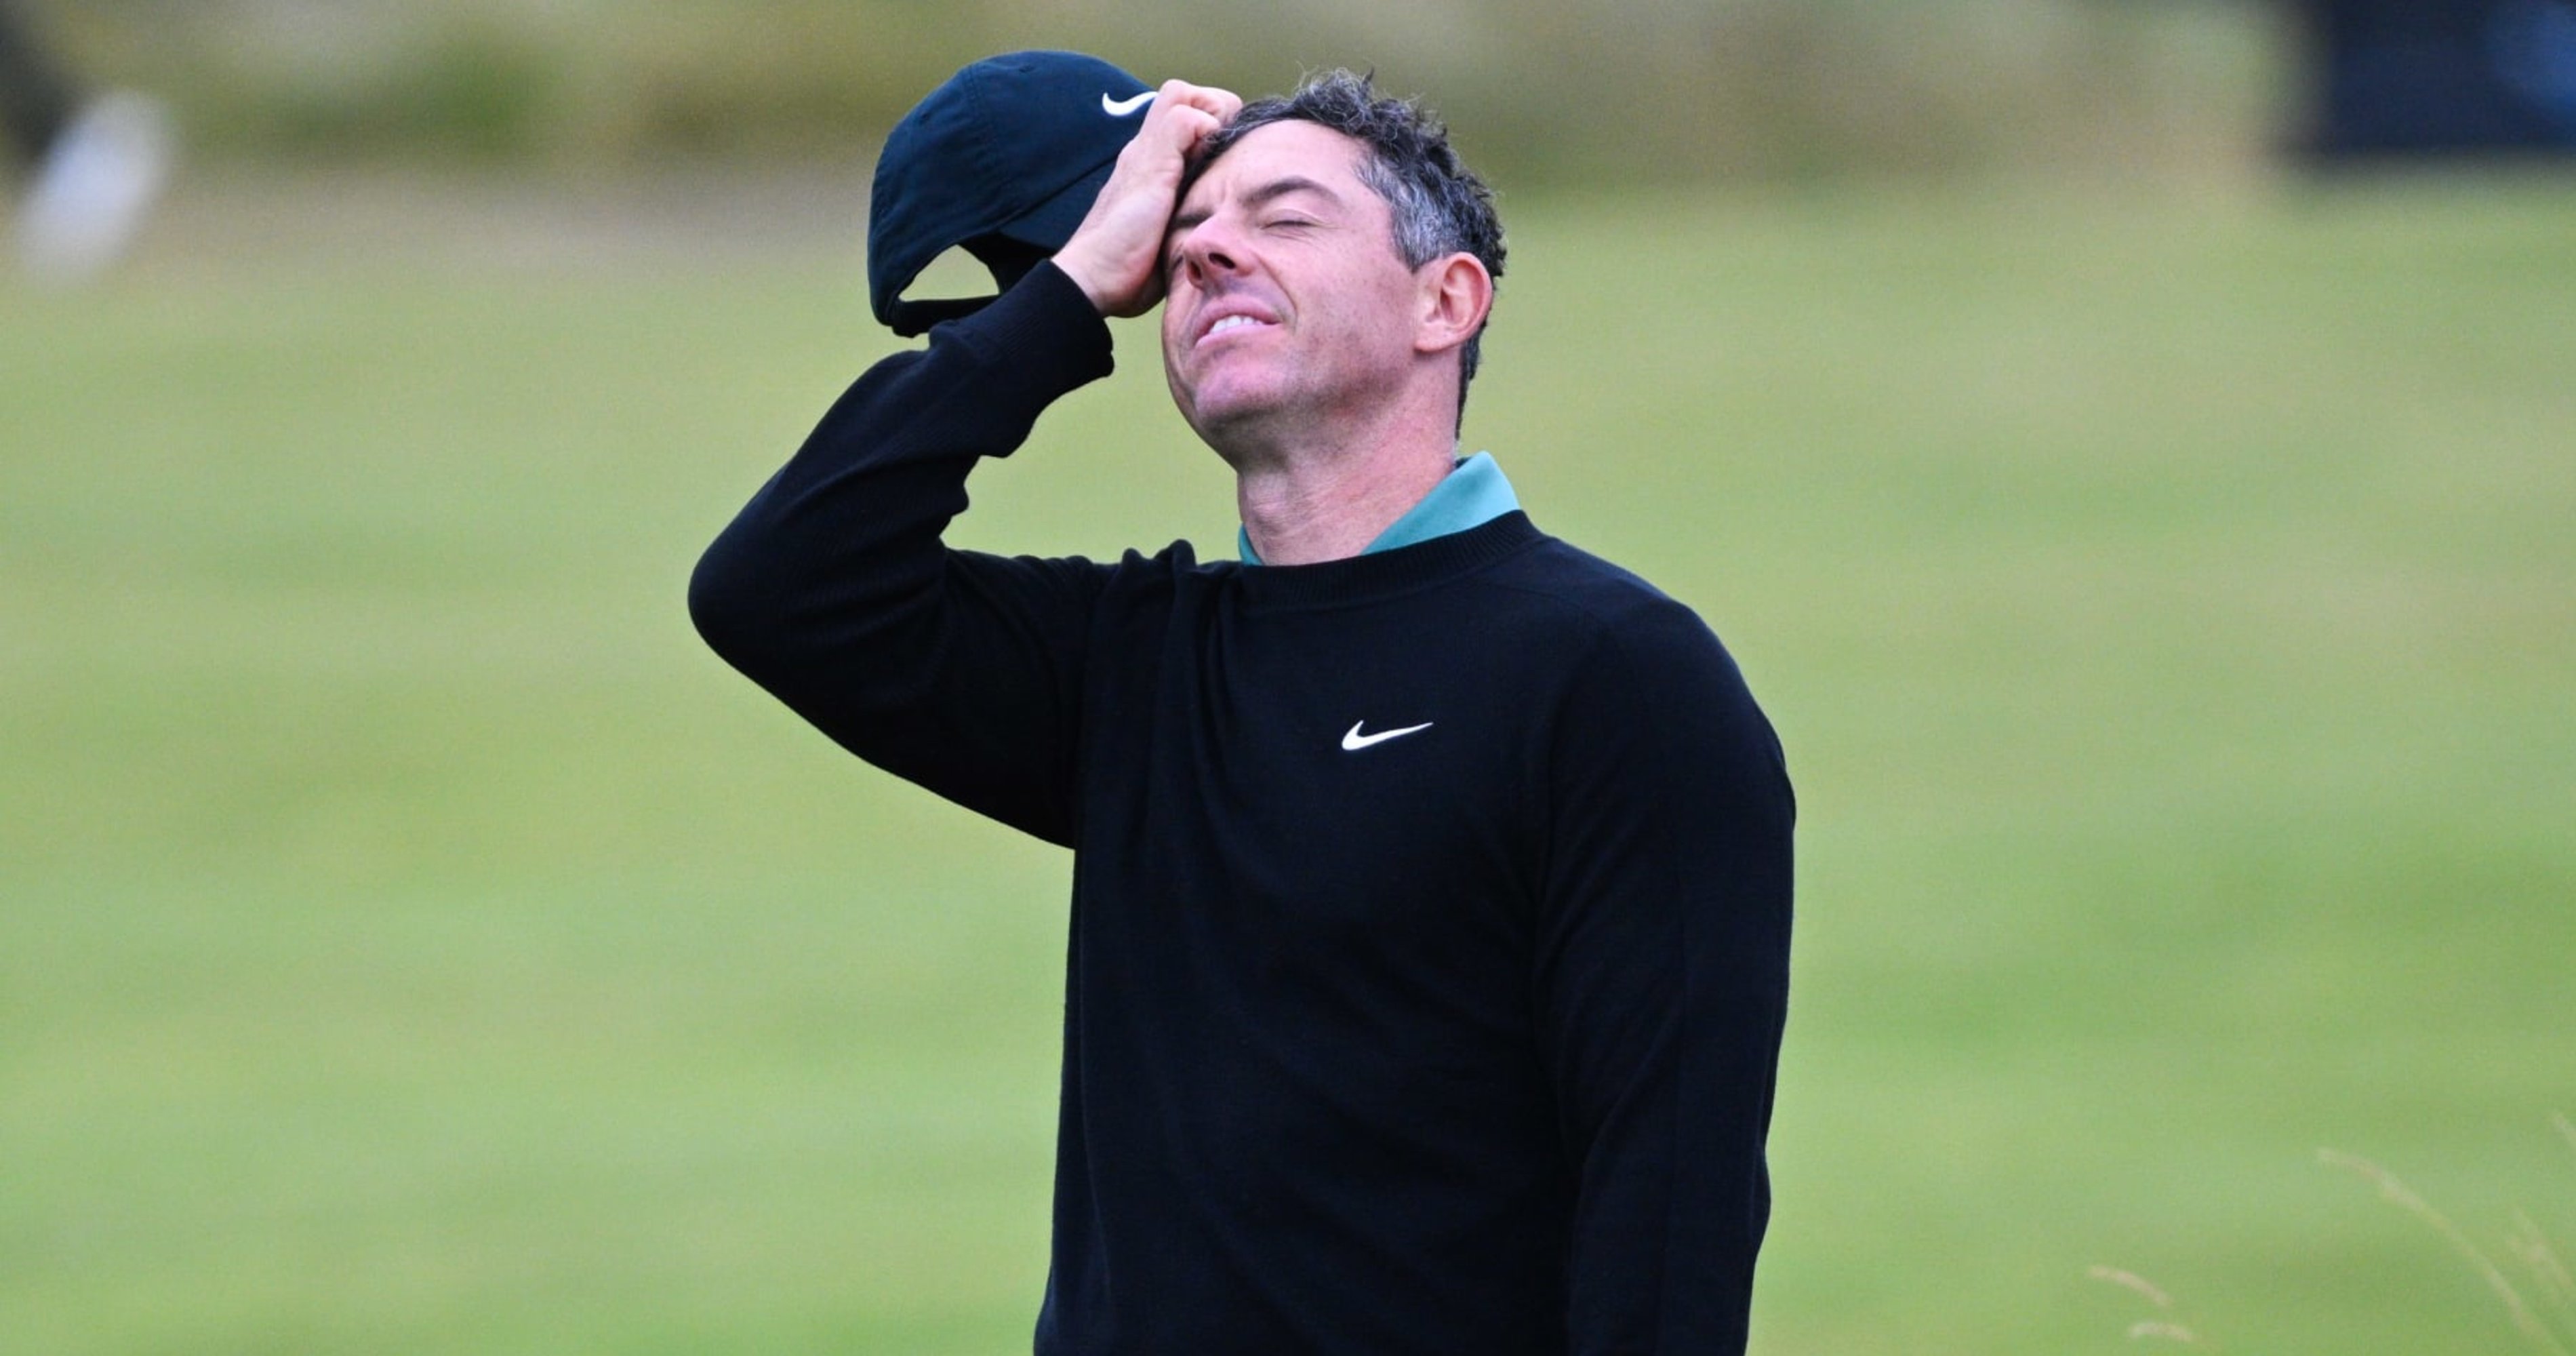 Rory McIlroy Has Worst Major Score Since 2019 at British Open After US Open Collapse